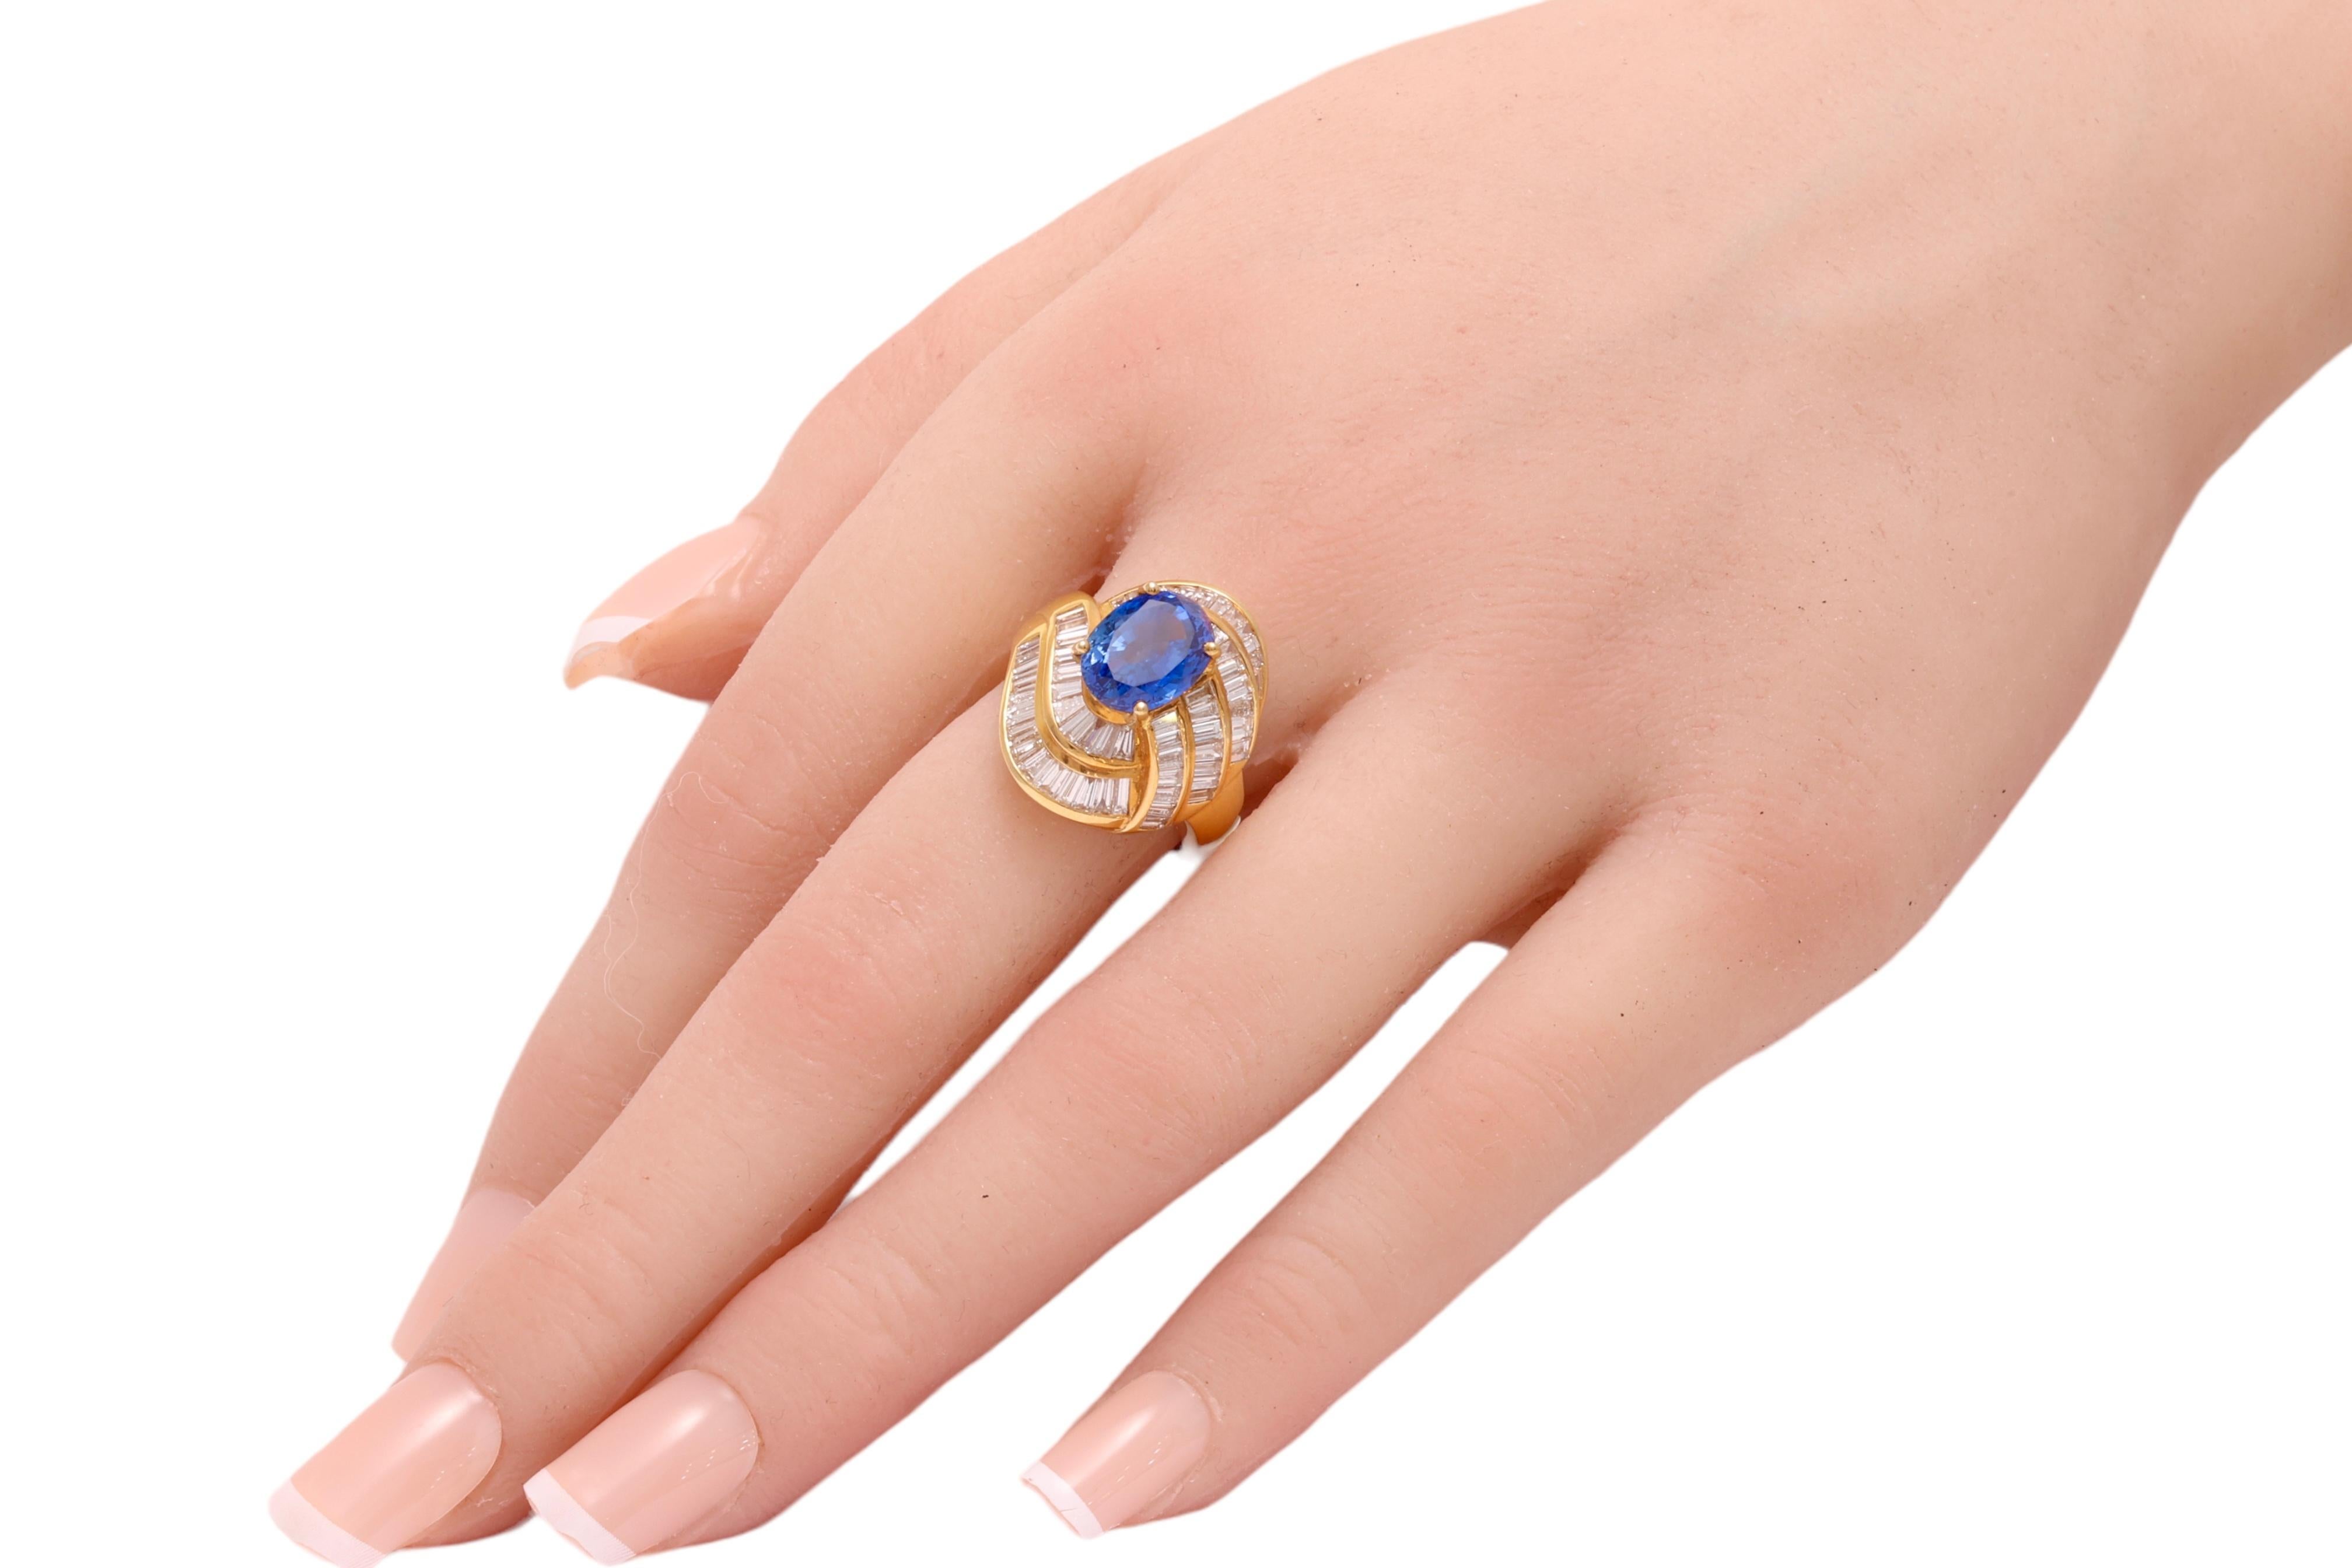  18 kt. Gold Ring With Ceylon Sapphire & Baguette Cut Diamonds For Sale 7